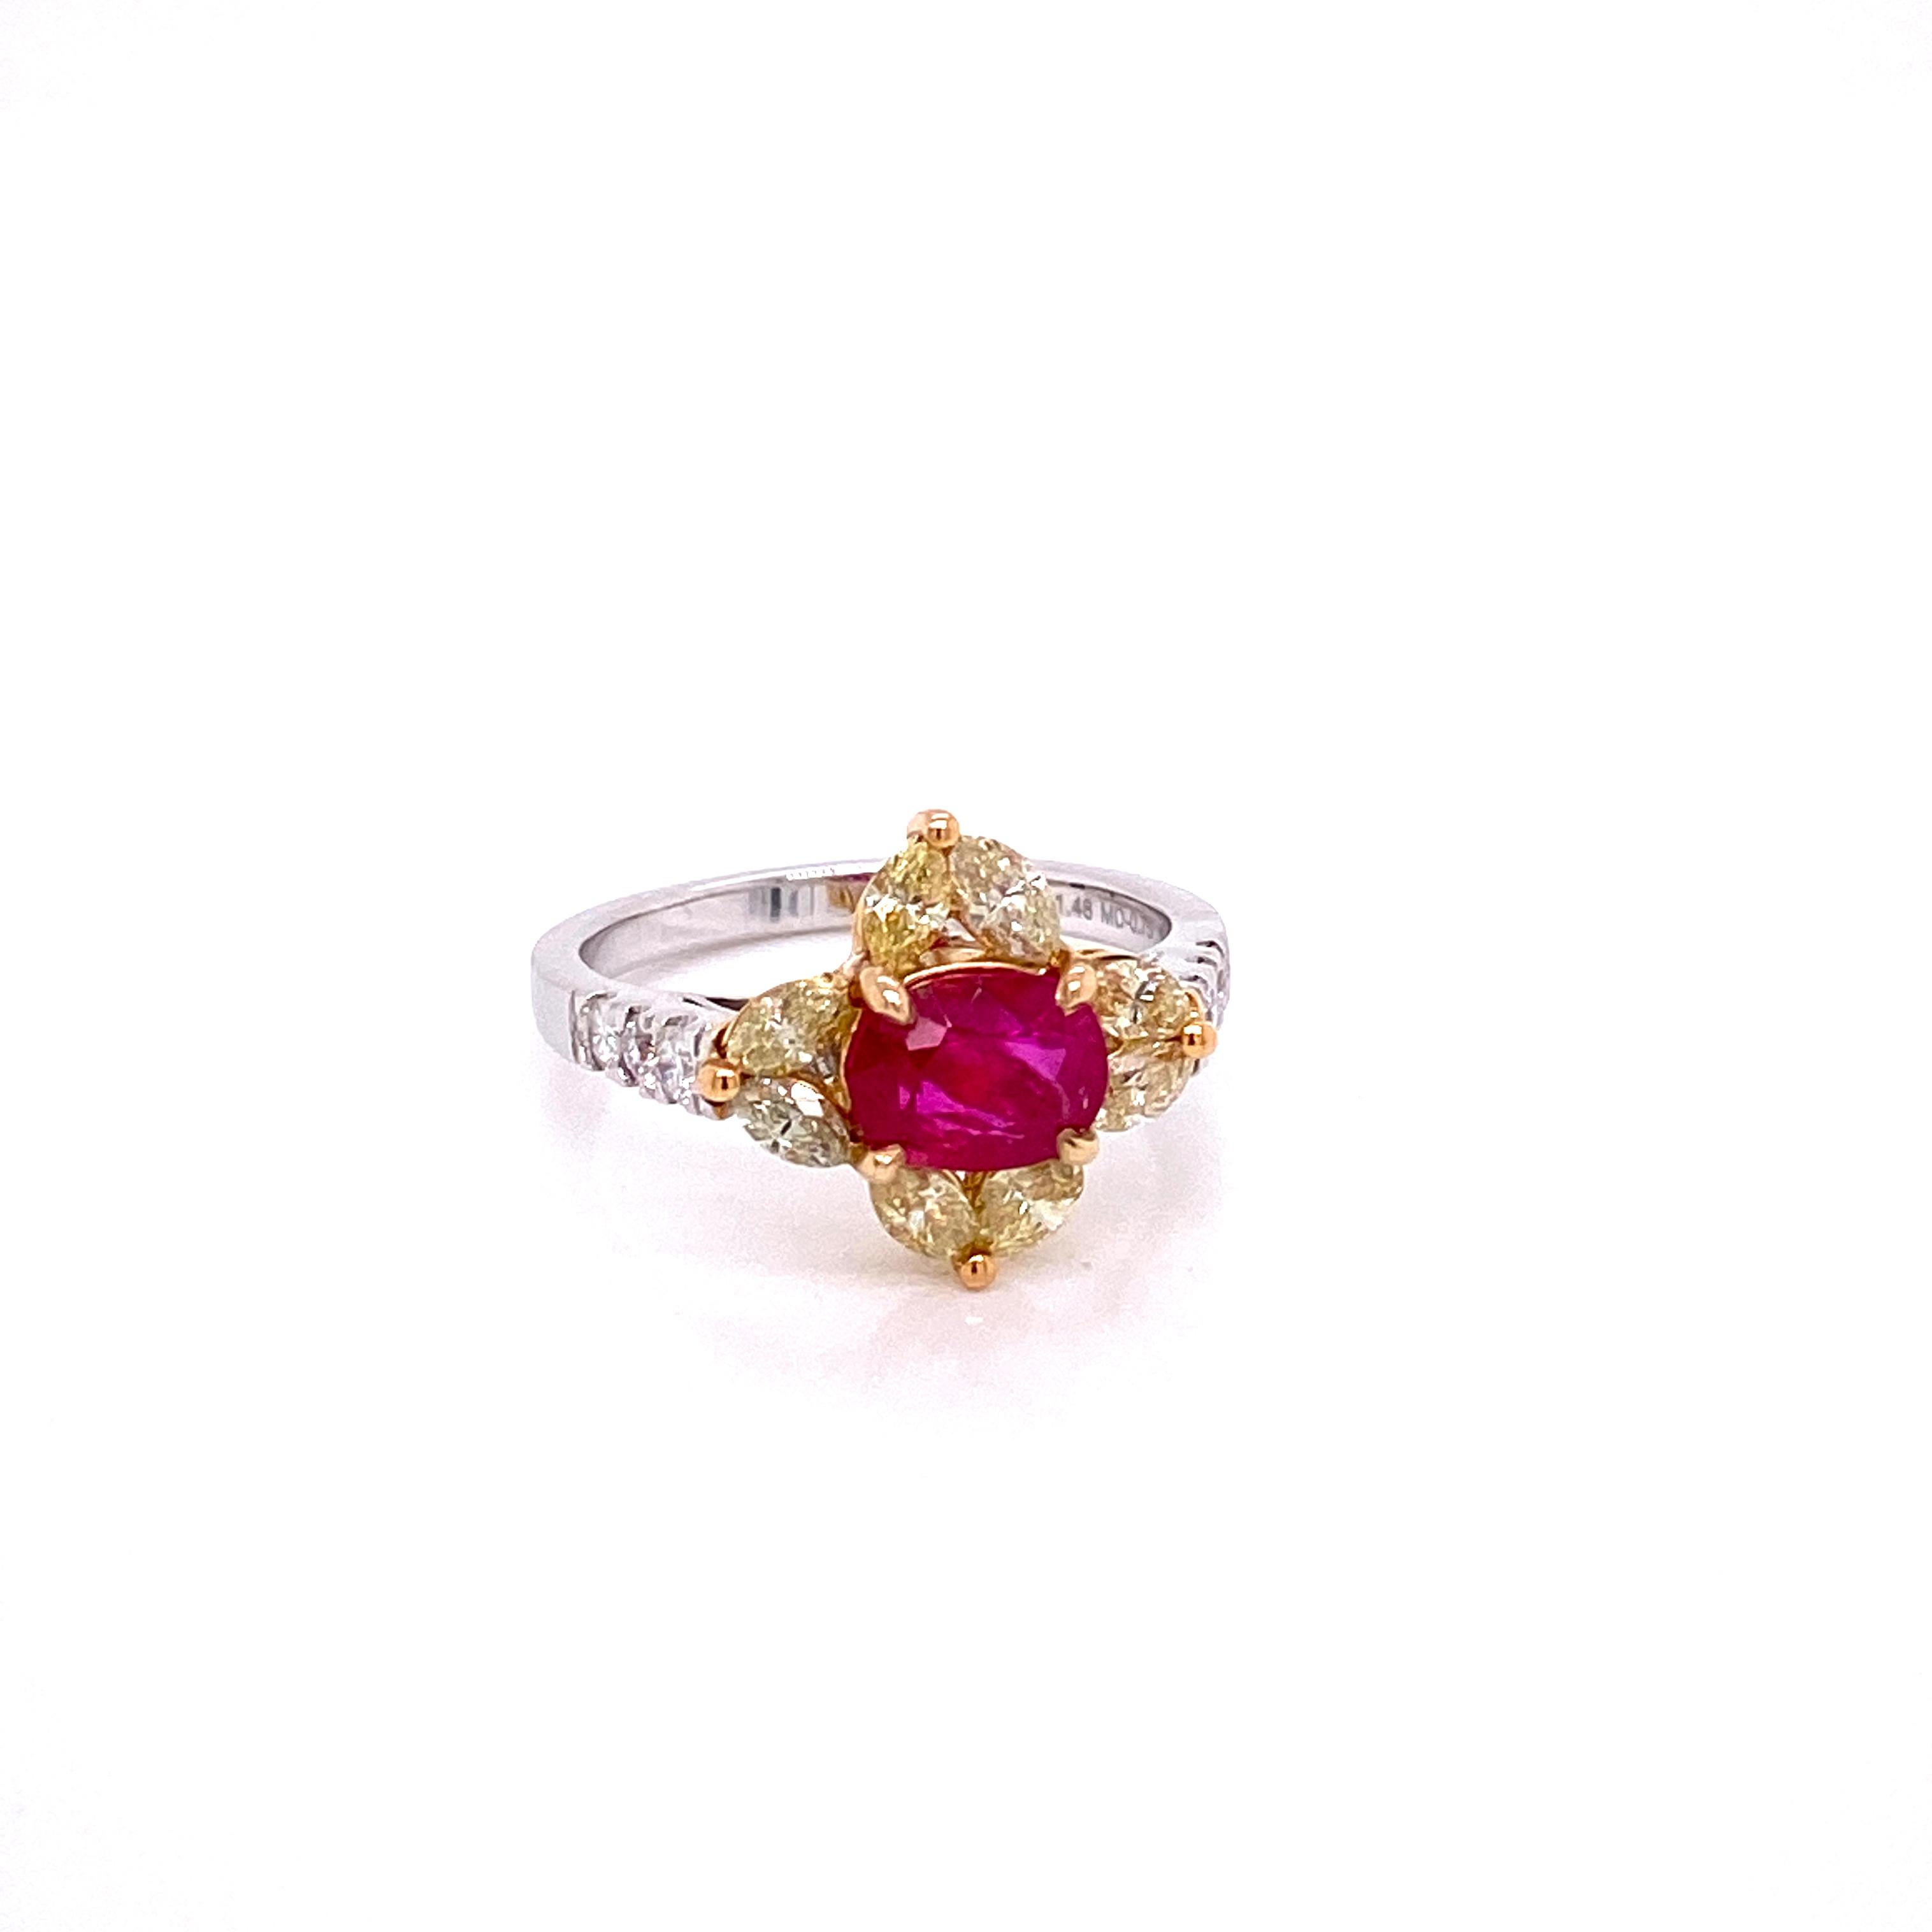 Contemporary 1.48 Carat GRS Certified No Heat Pigeon's Blood Red Burma Ruby and Diamond Ring